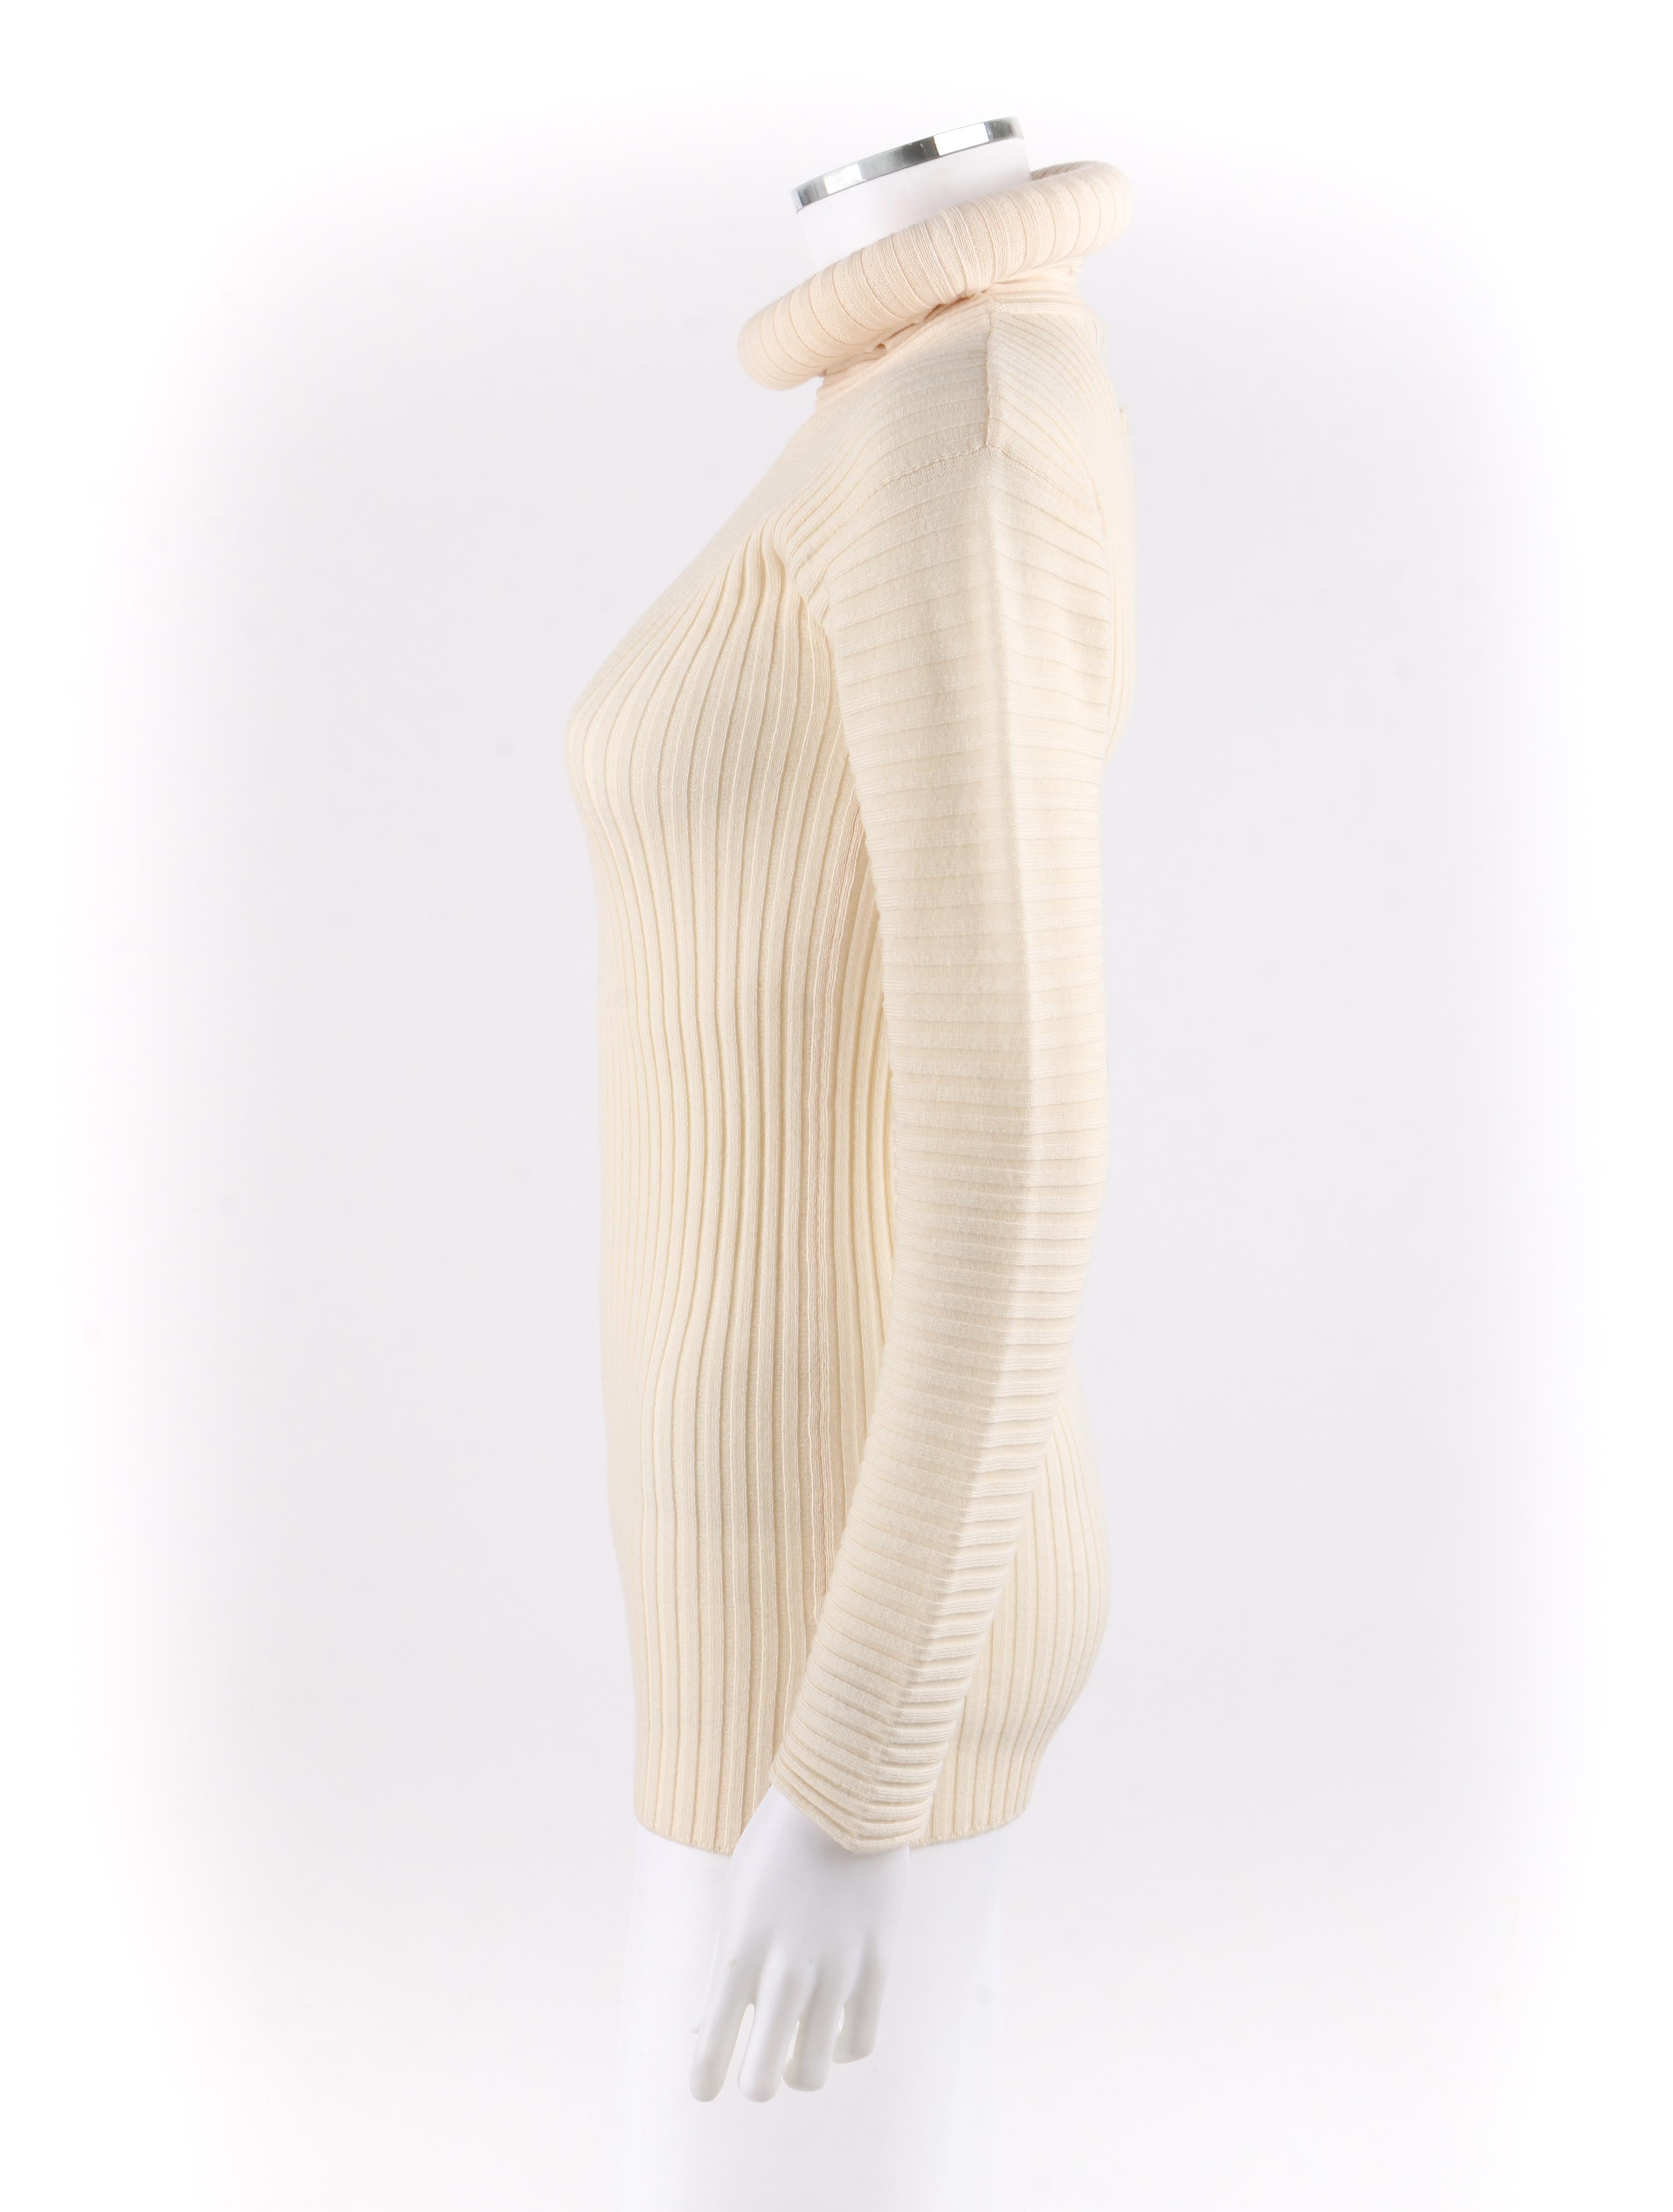 JEAN PAUL GAULTIER Mailie c.1990’s Ivory Turtleneck Ribbed Knit Wool Sweater 2